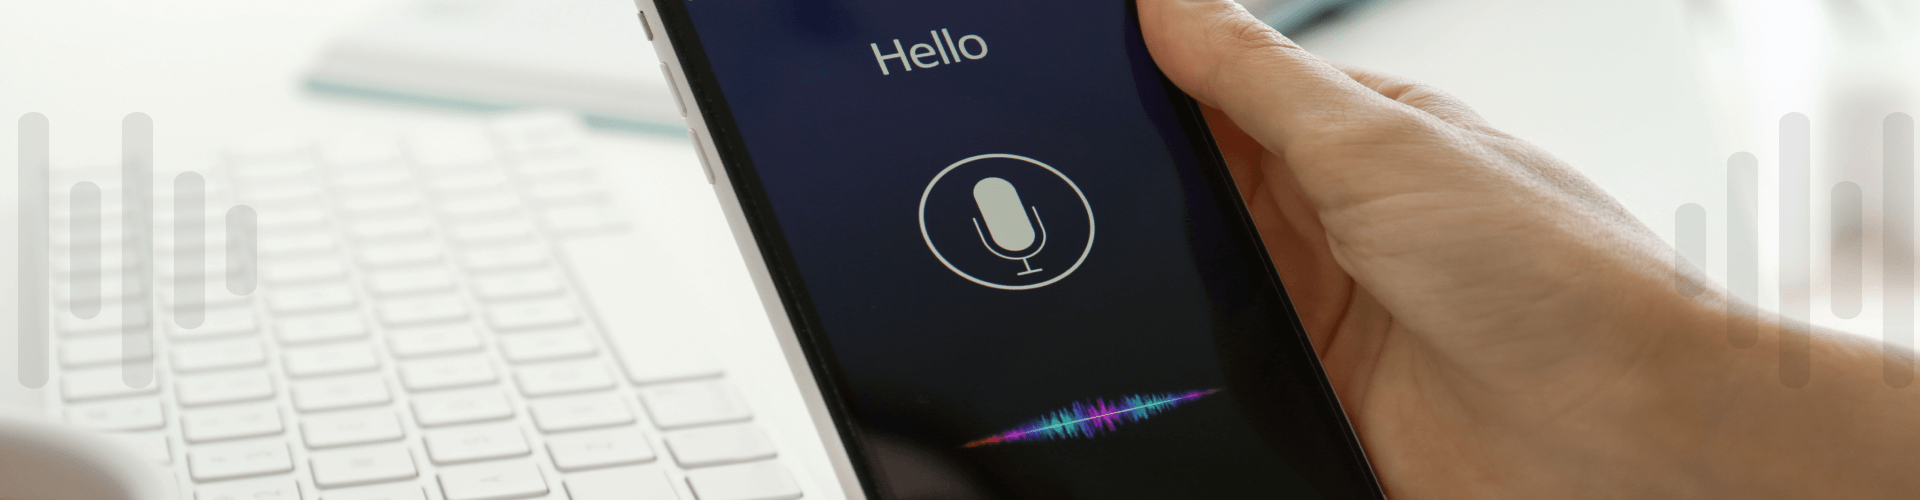 Voice search optimization deatiled